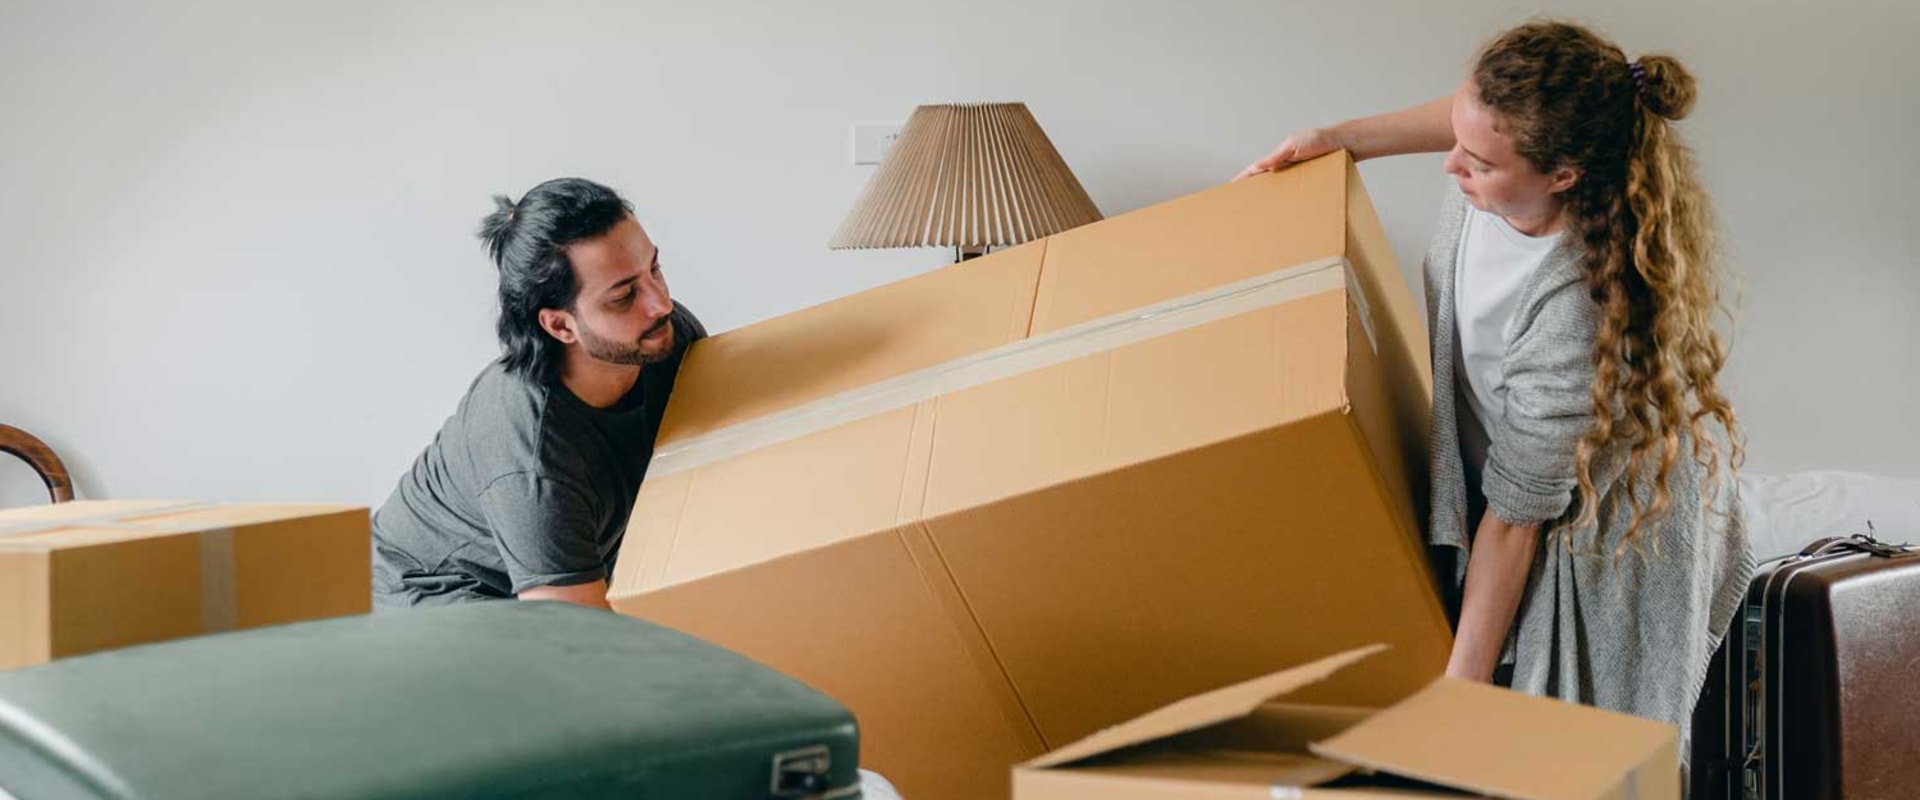 Commercial Packing Services in Miami